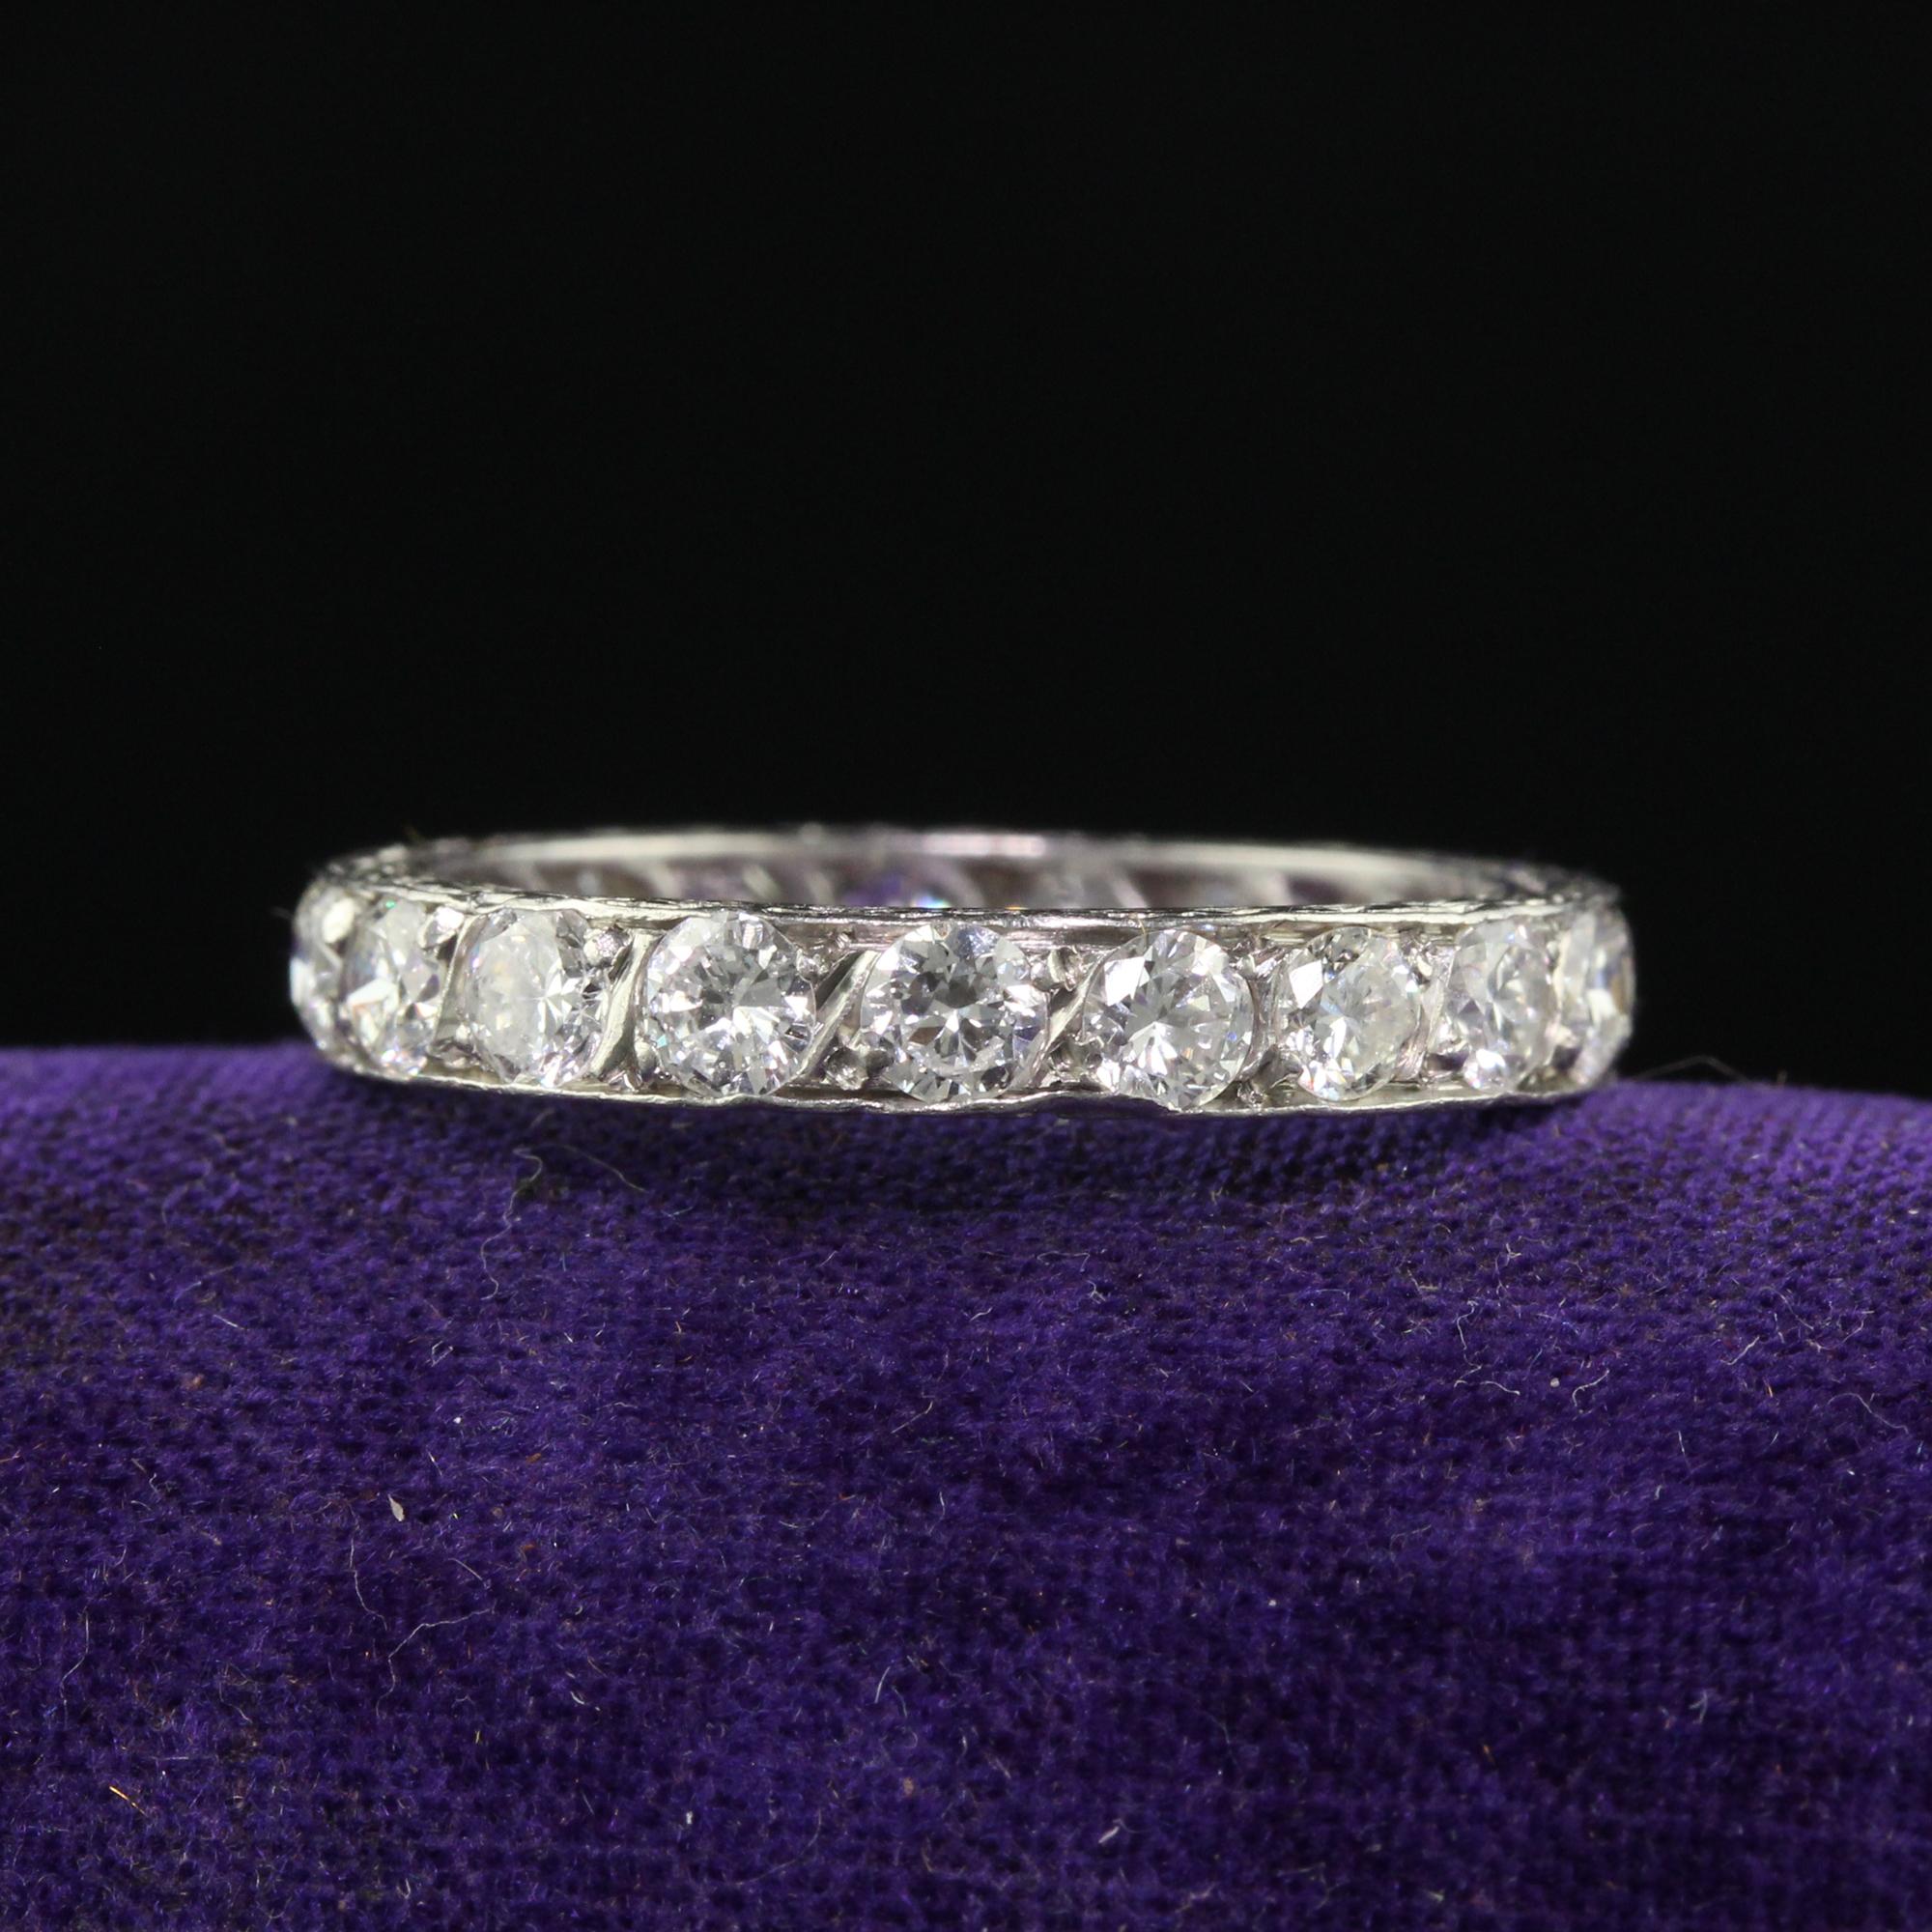 Beautiful Antique Art Deco Platinum Old European Cut Diamond Engraved Eternity Band. This gorgeous art deco eternity band is crafted in platinum. The ring has beautiful white old cut diamonds going around the entire ring. The sides of the ring have